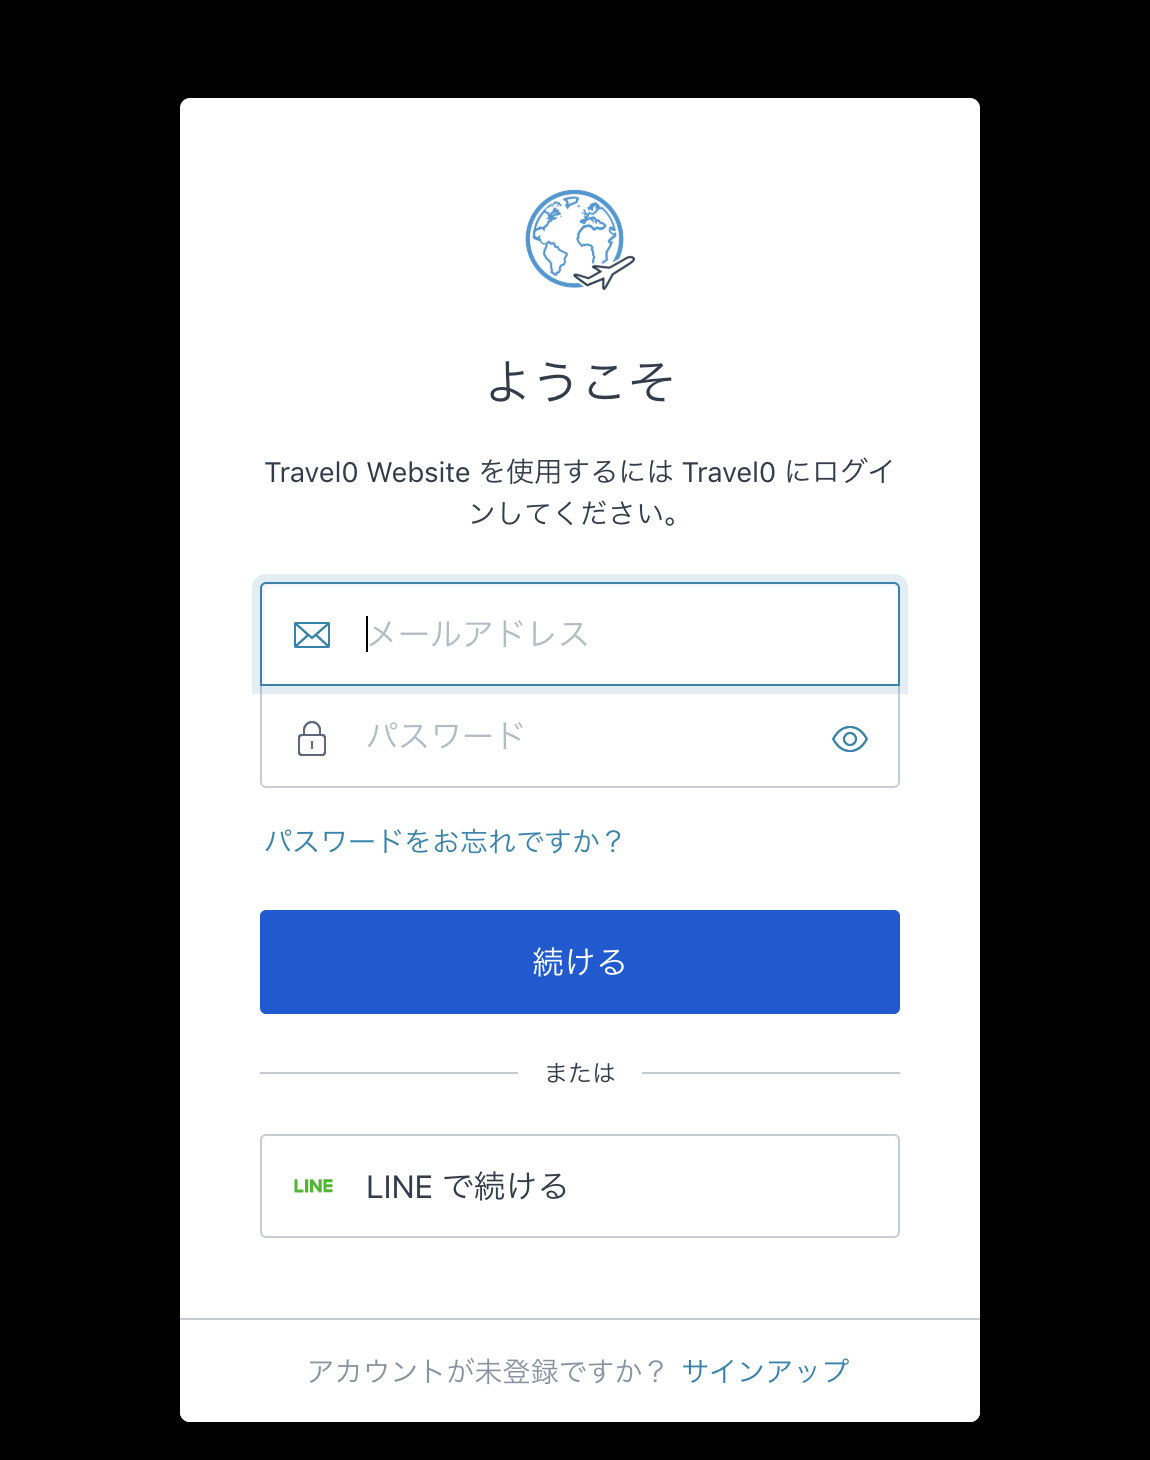 Login screen in Japanese with LINE login